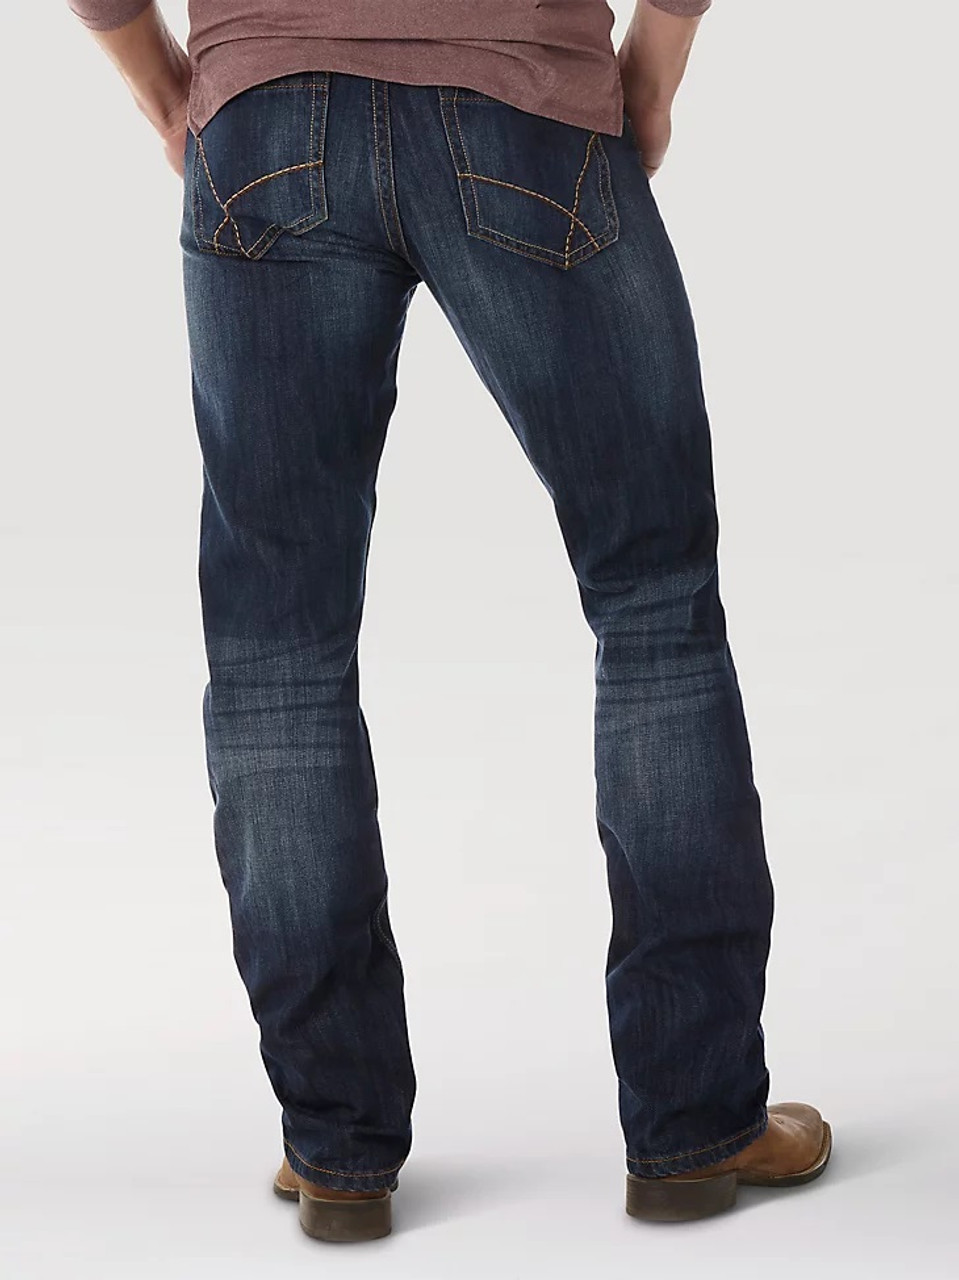 42 Vintage Boot Cut Jeans Wrangler Men's 20X No Buy direct from the ...